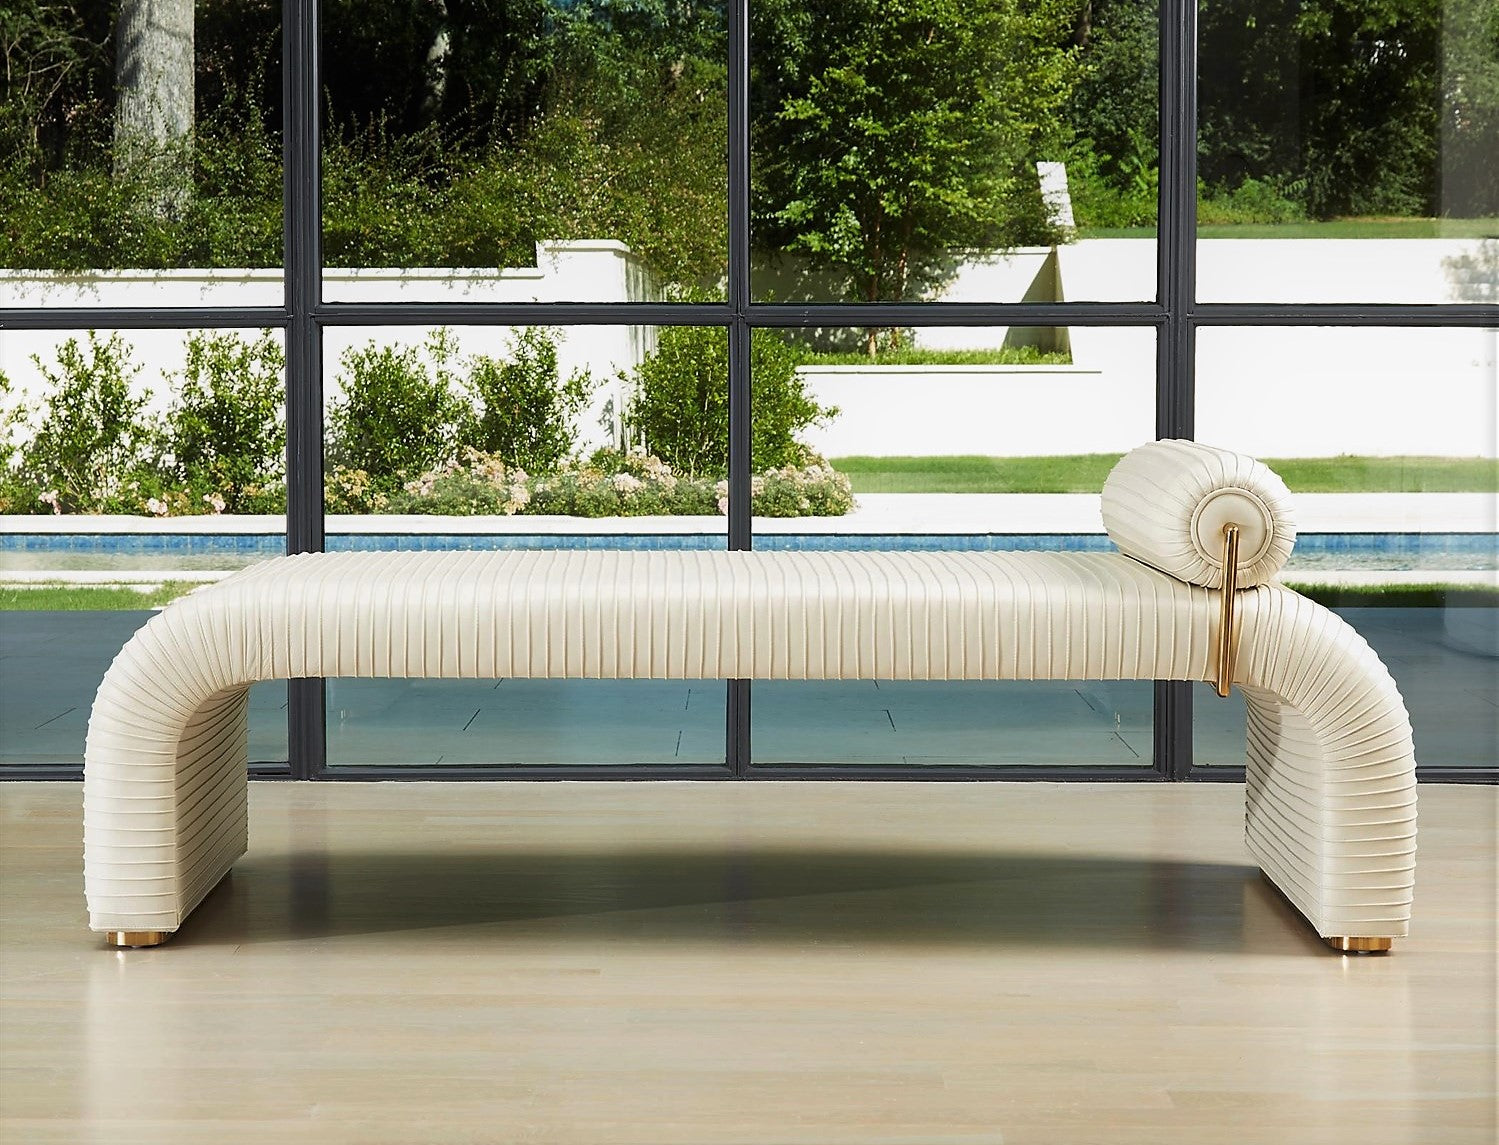 Cade Daybed - Milk or Graphite Leather